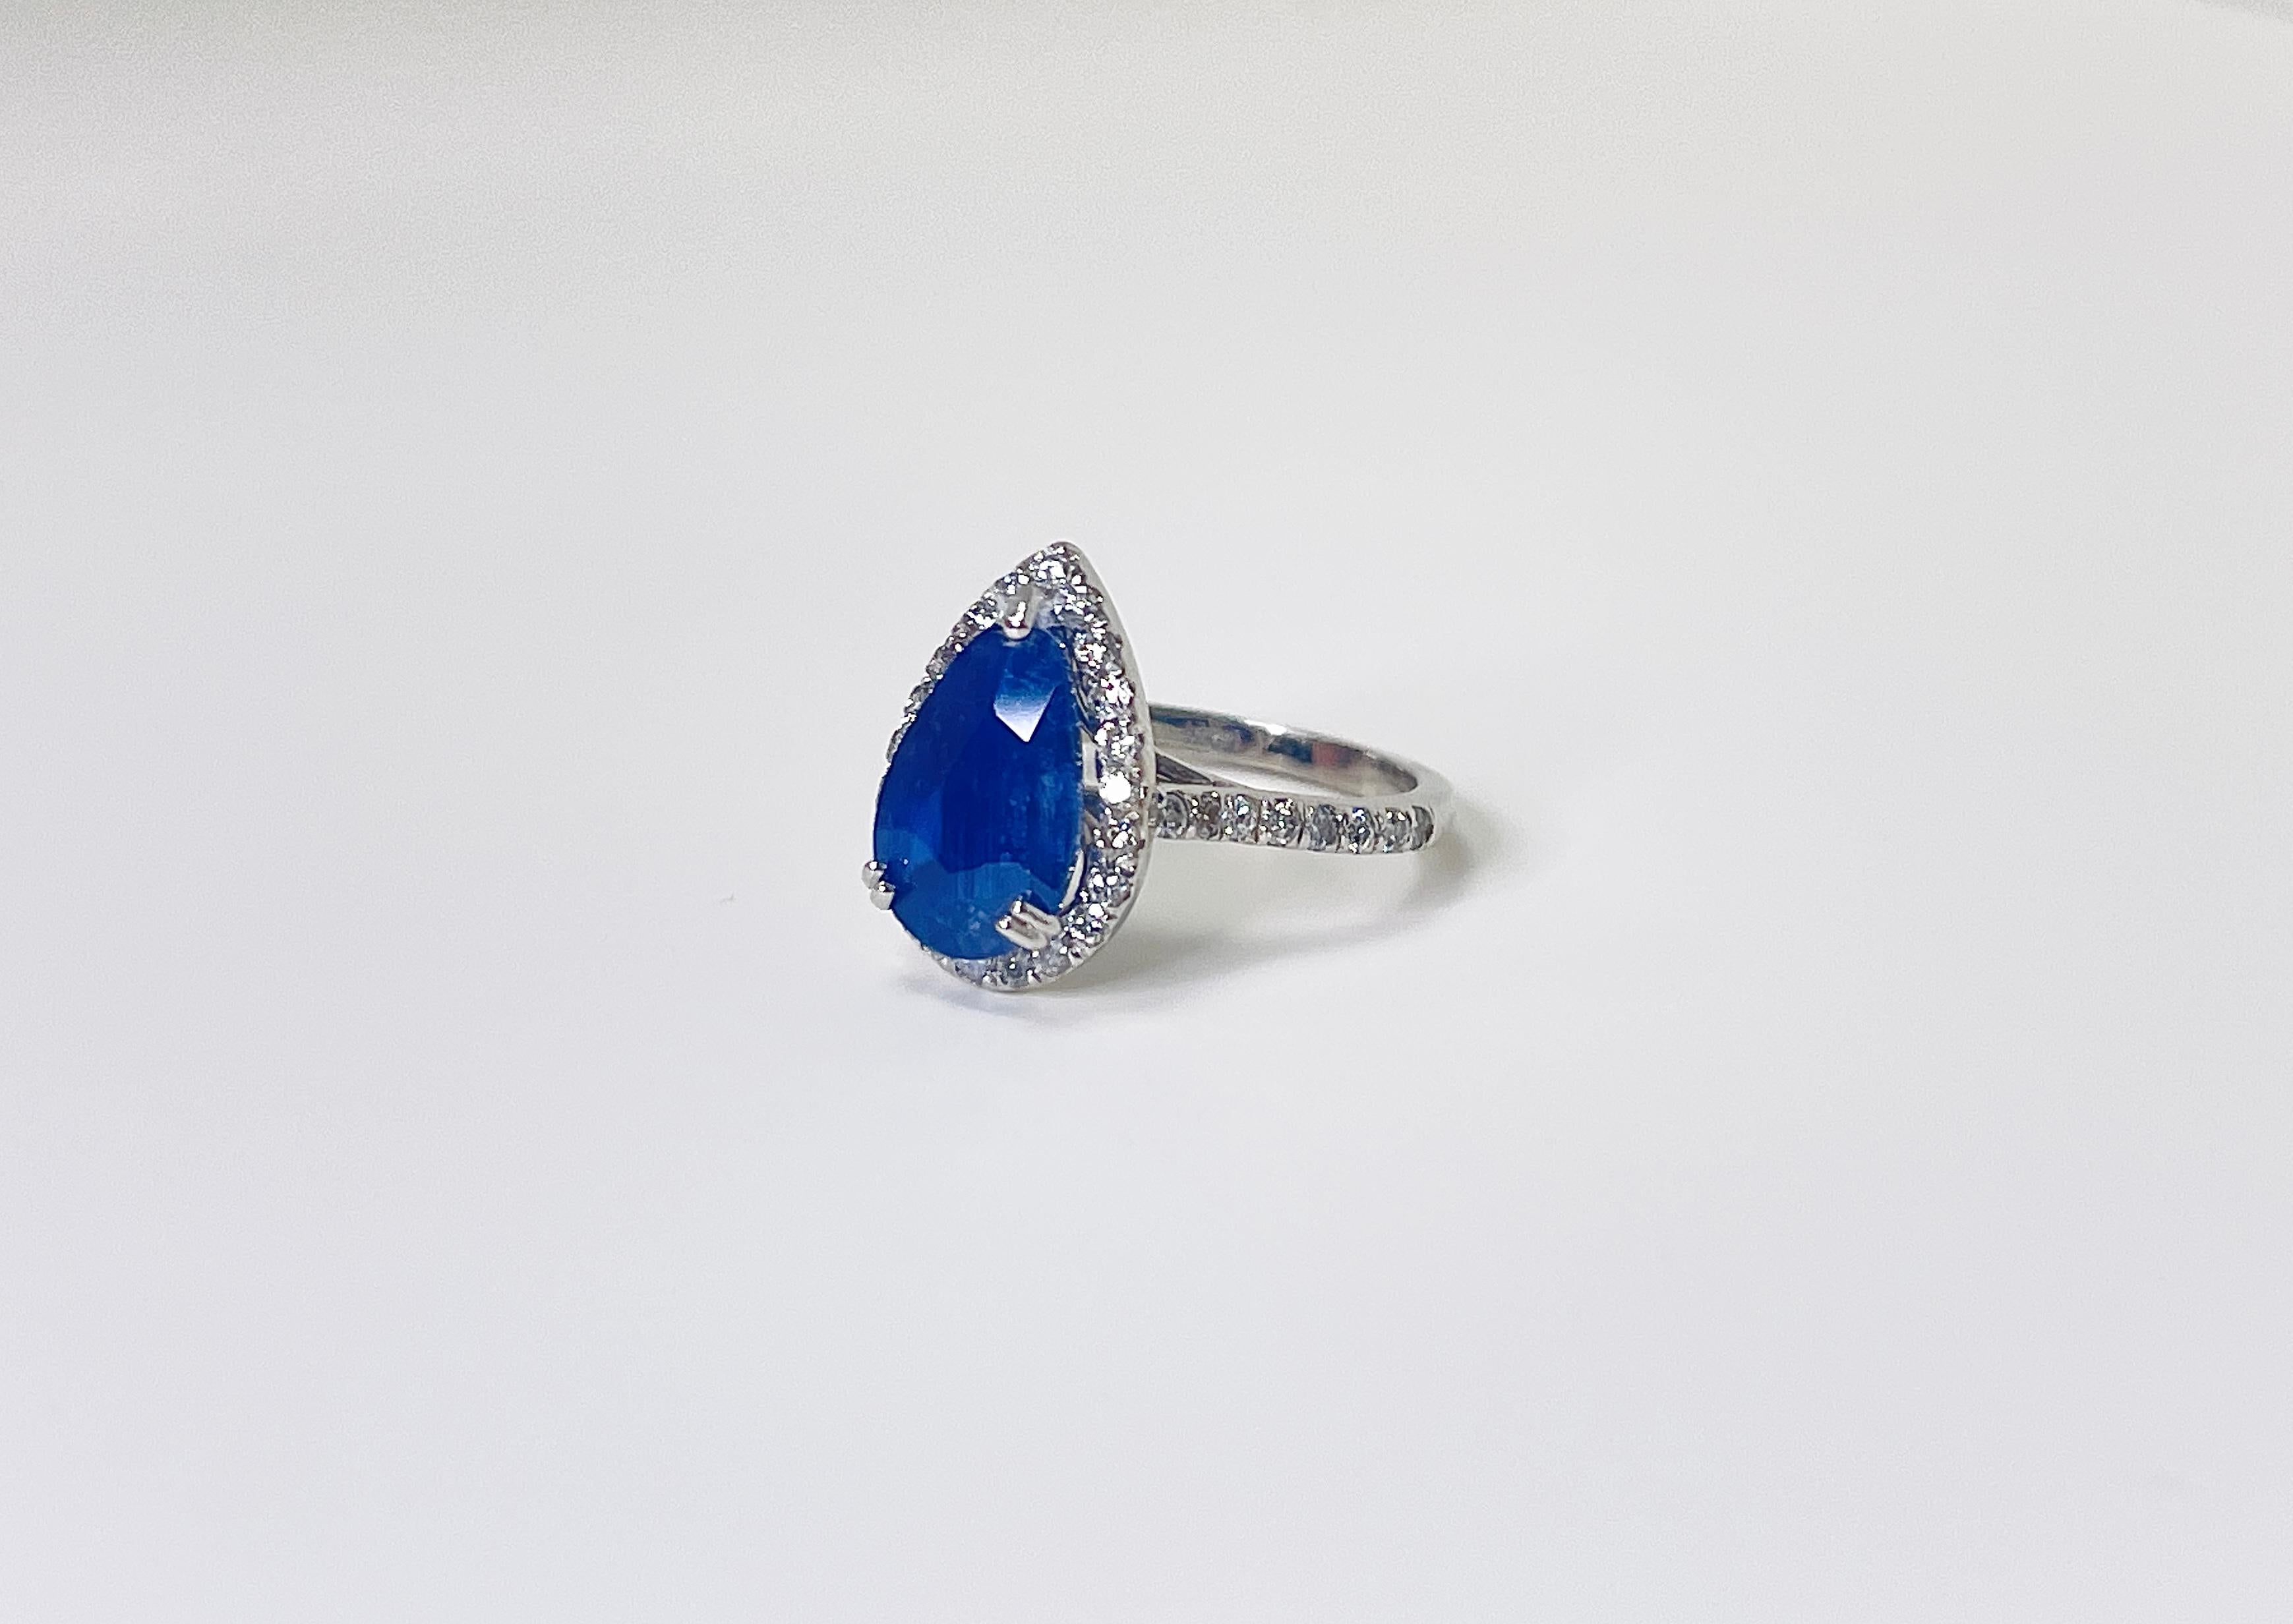 3.65 Carat Intense Blue Pear Cut Natural Sapphire Diamond 14K White Gold Ring In New Condition For Sale In Great Neck, NY